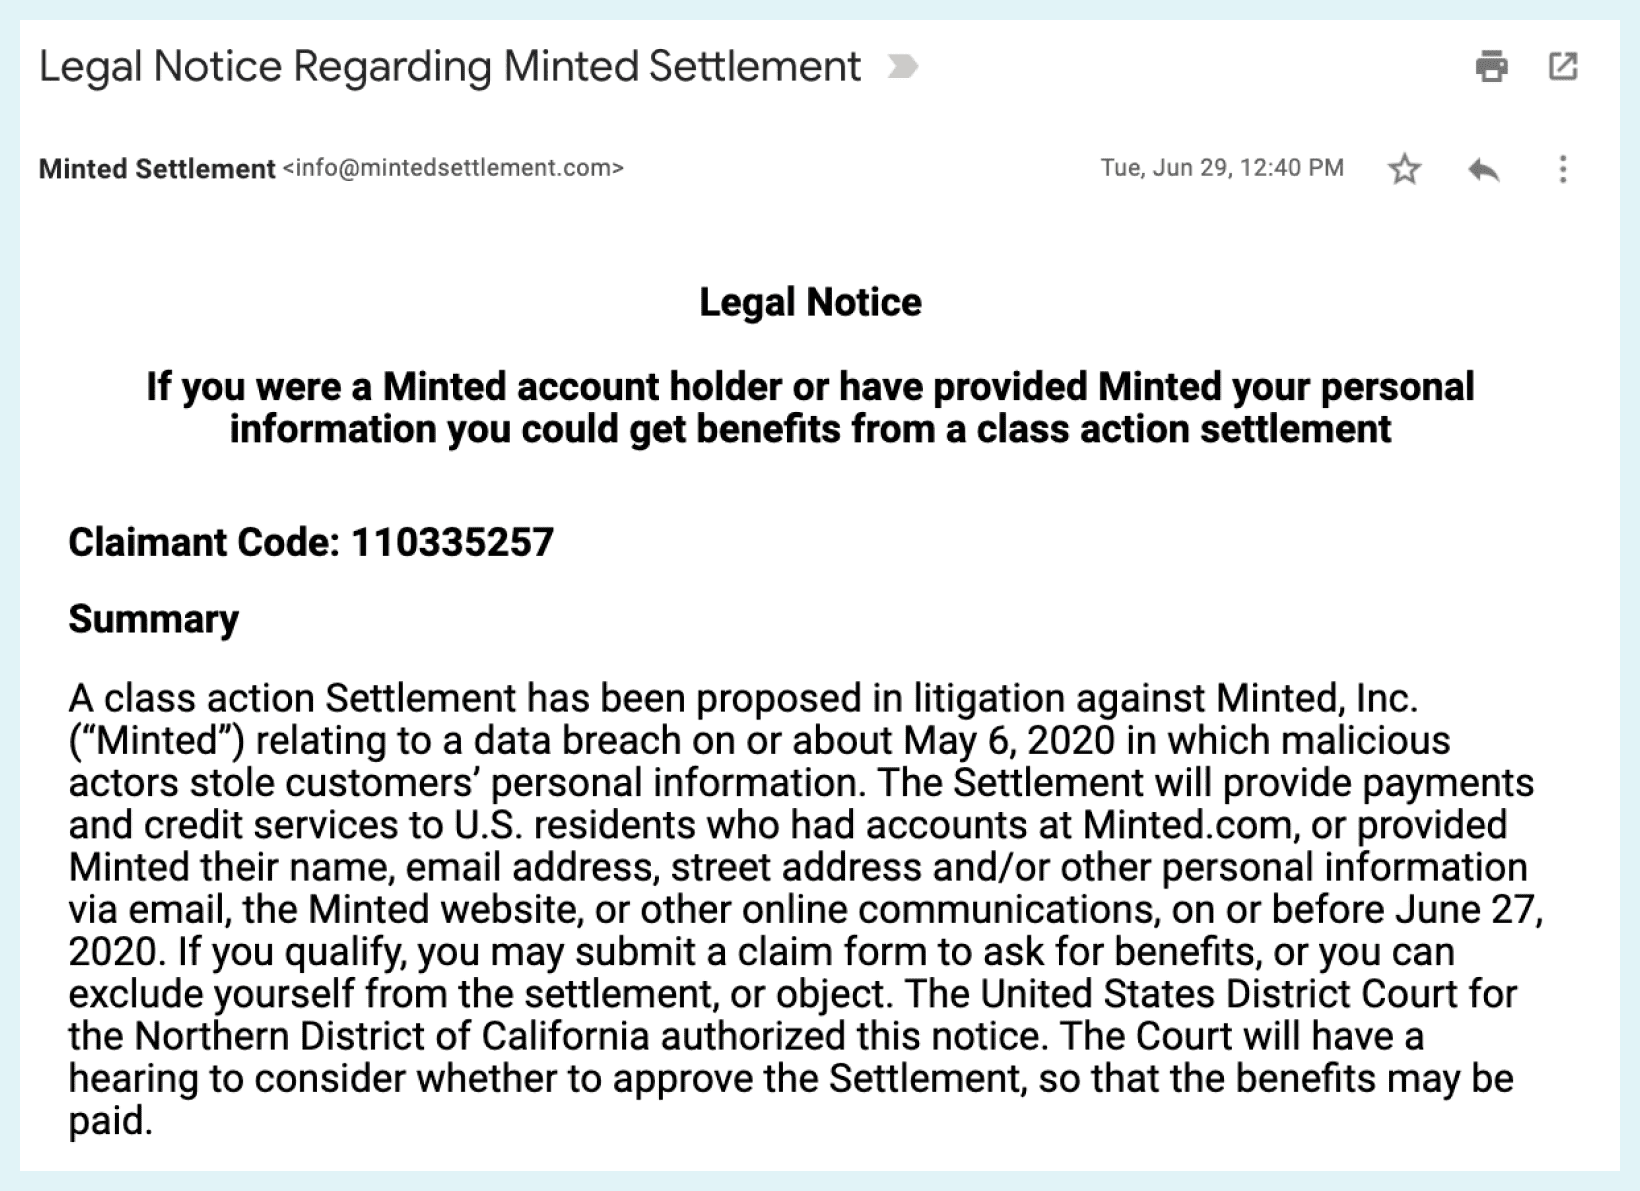 Is there a class action suit against minted?